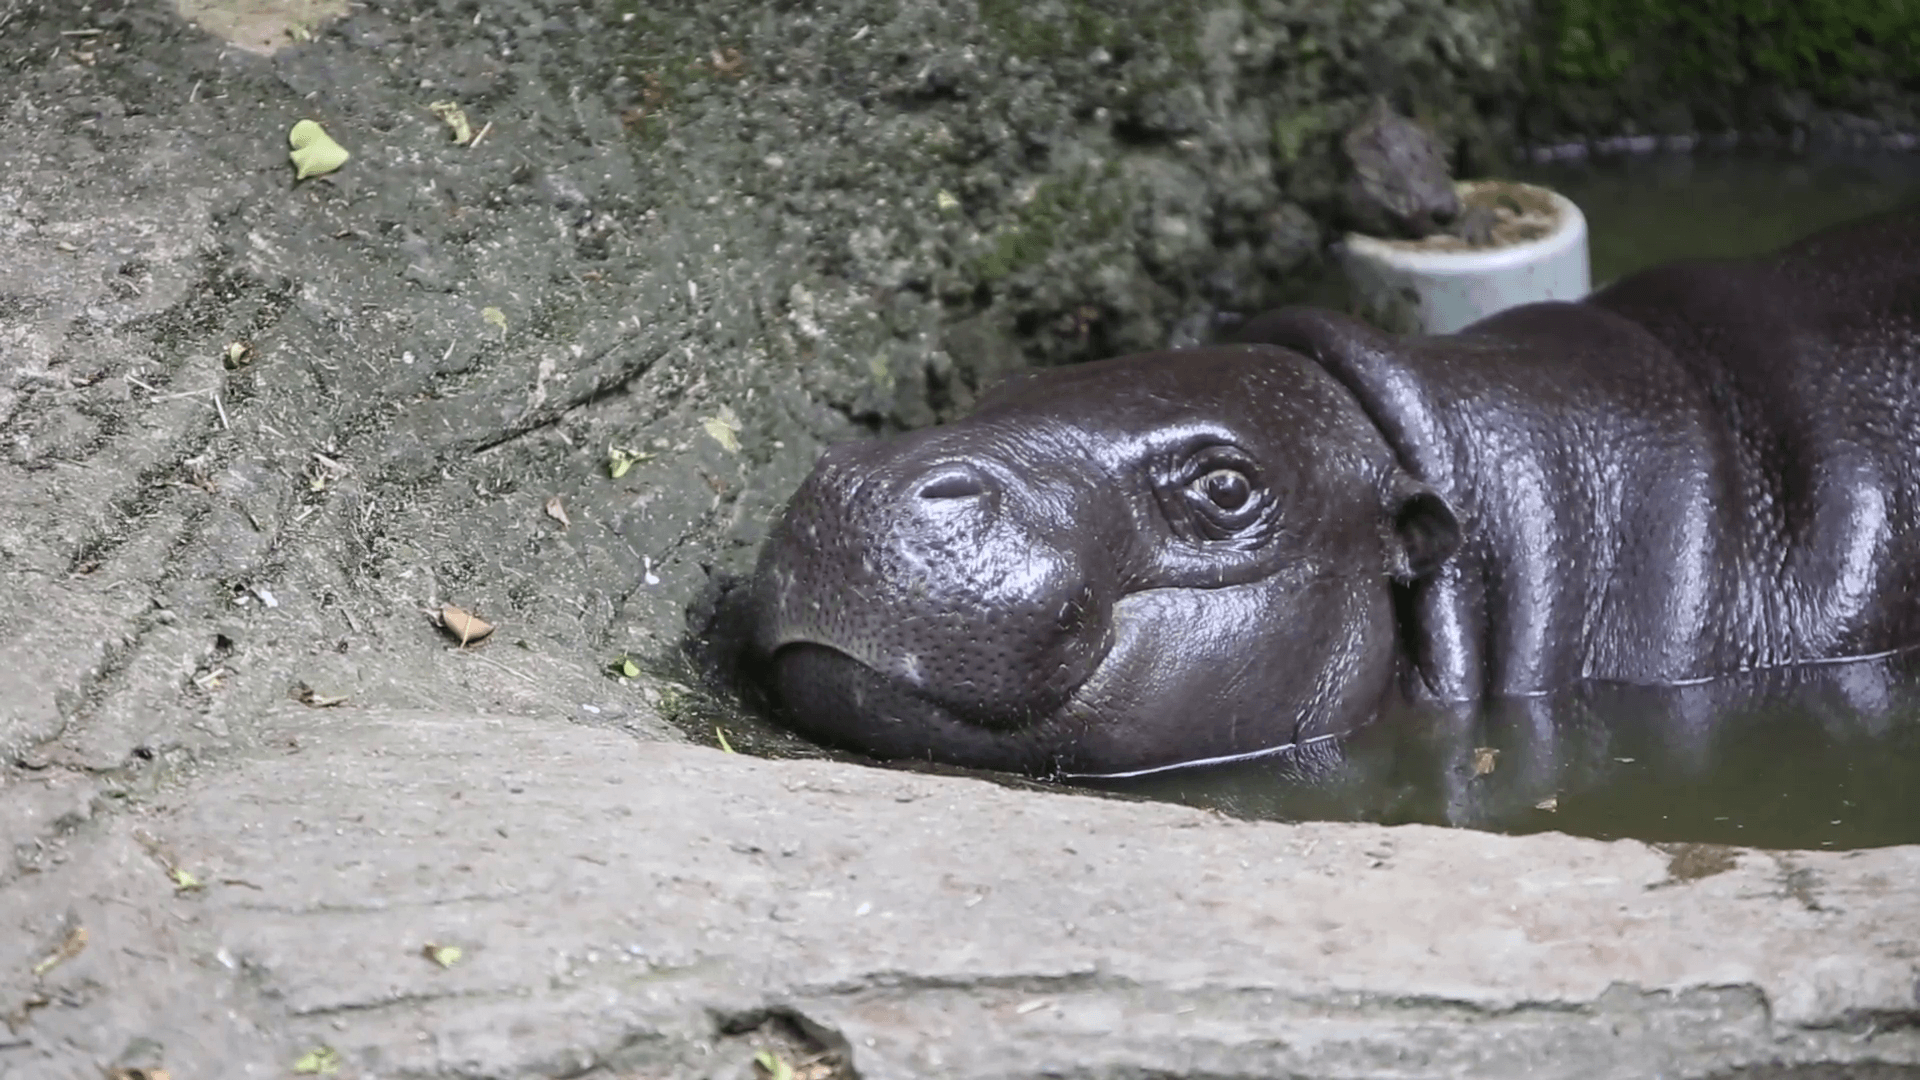 A Pygmy Hippo take a bath in the lake water at a day hot summer